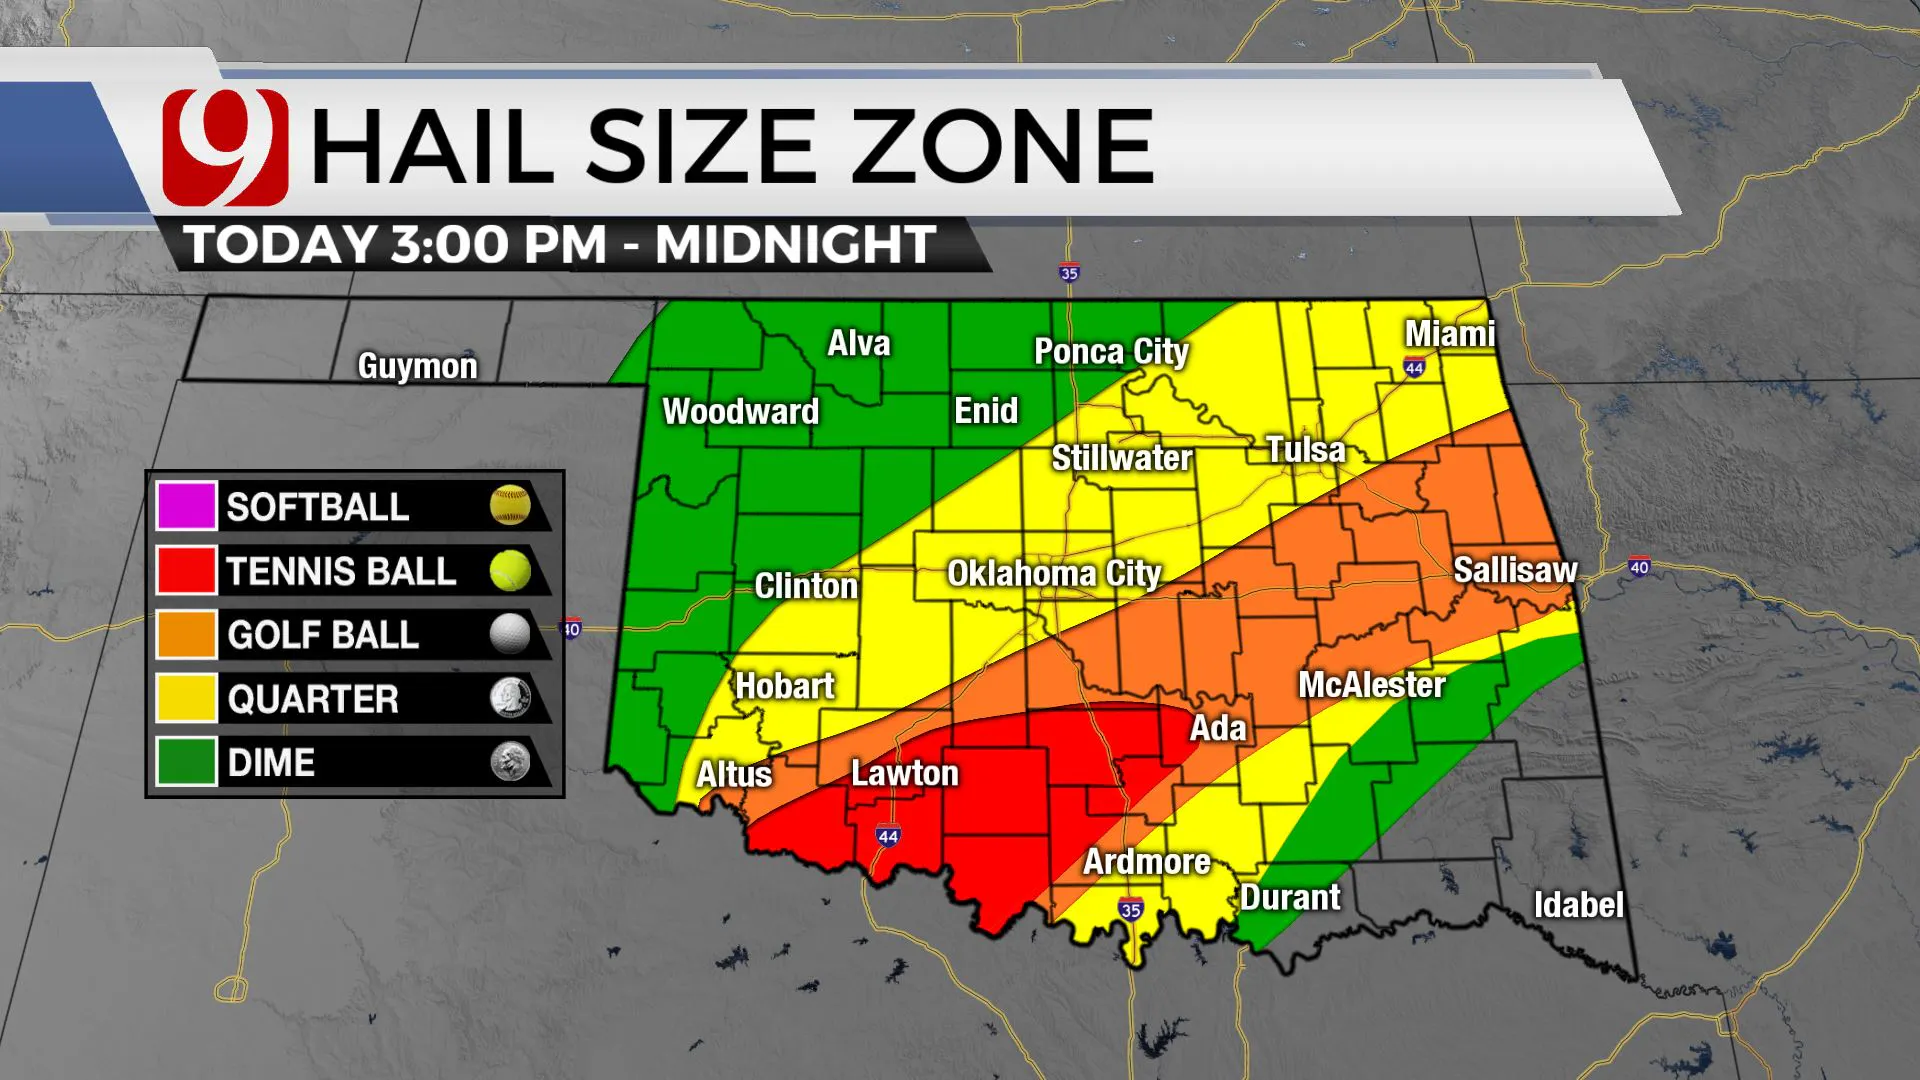 Hail size zone Thursday afternoon.